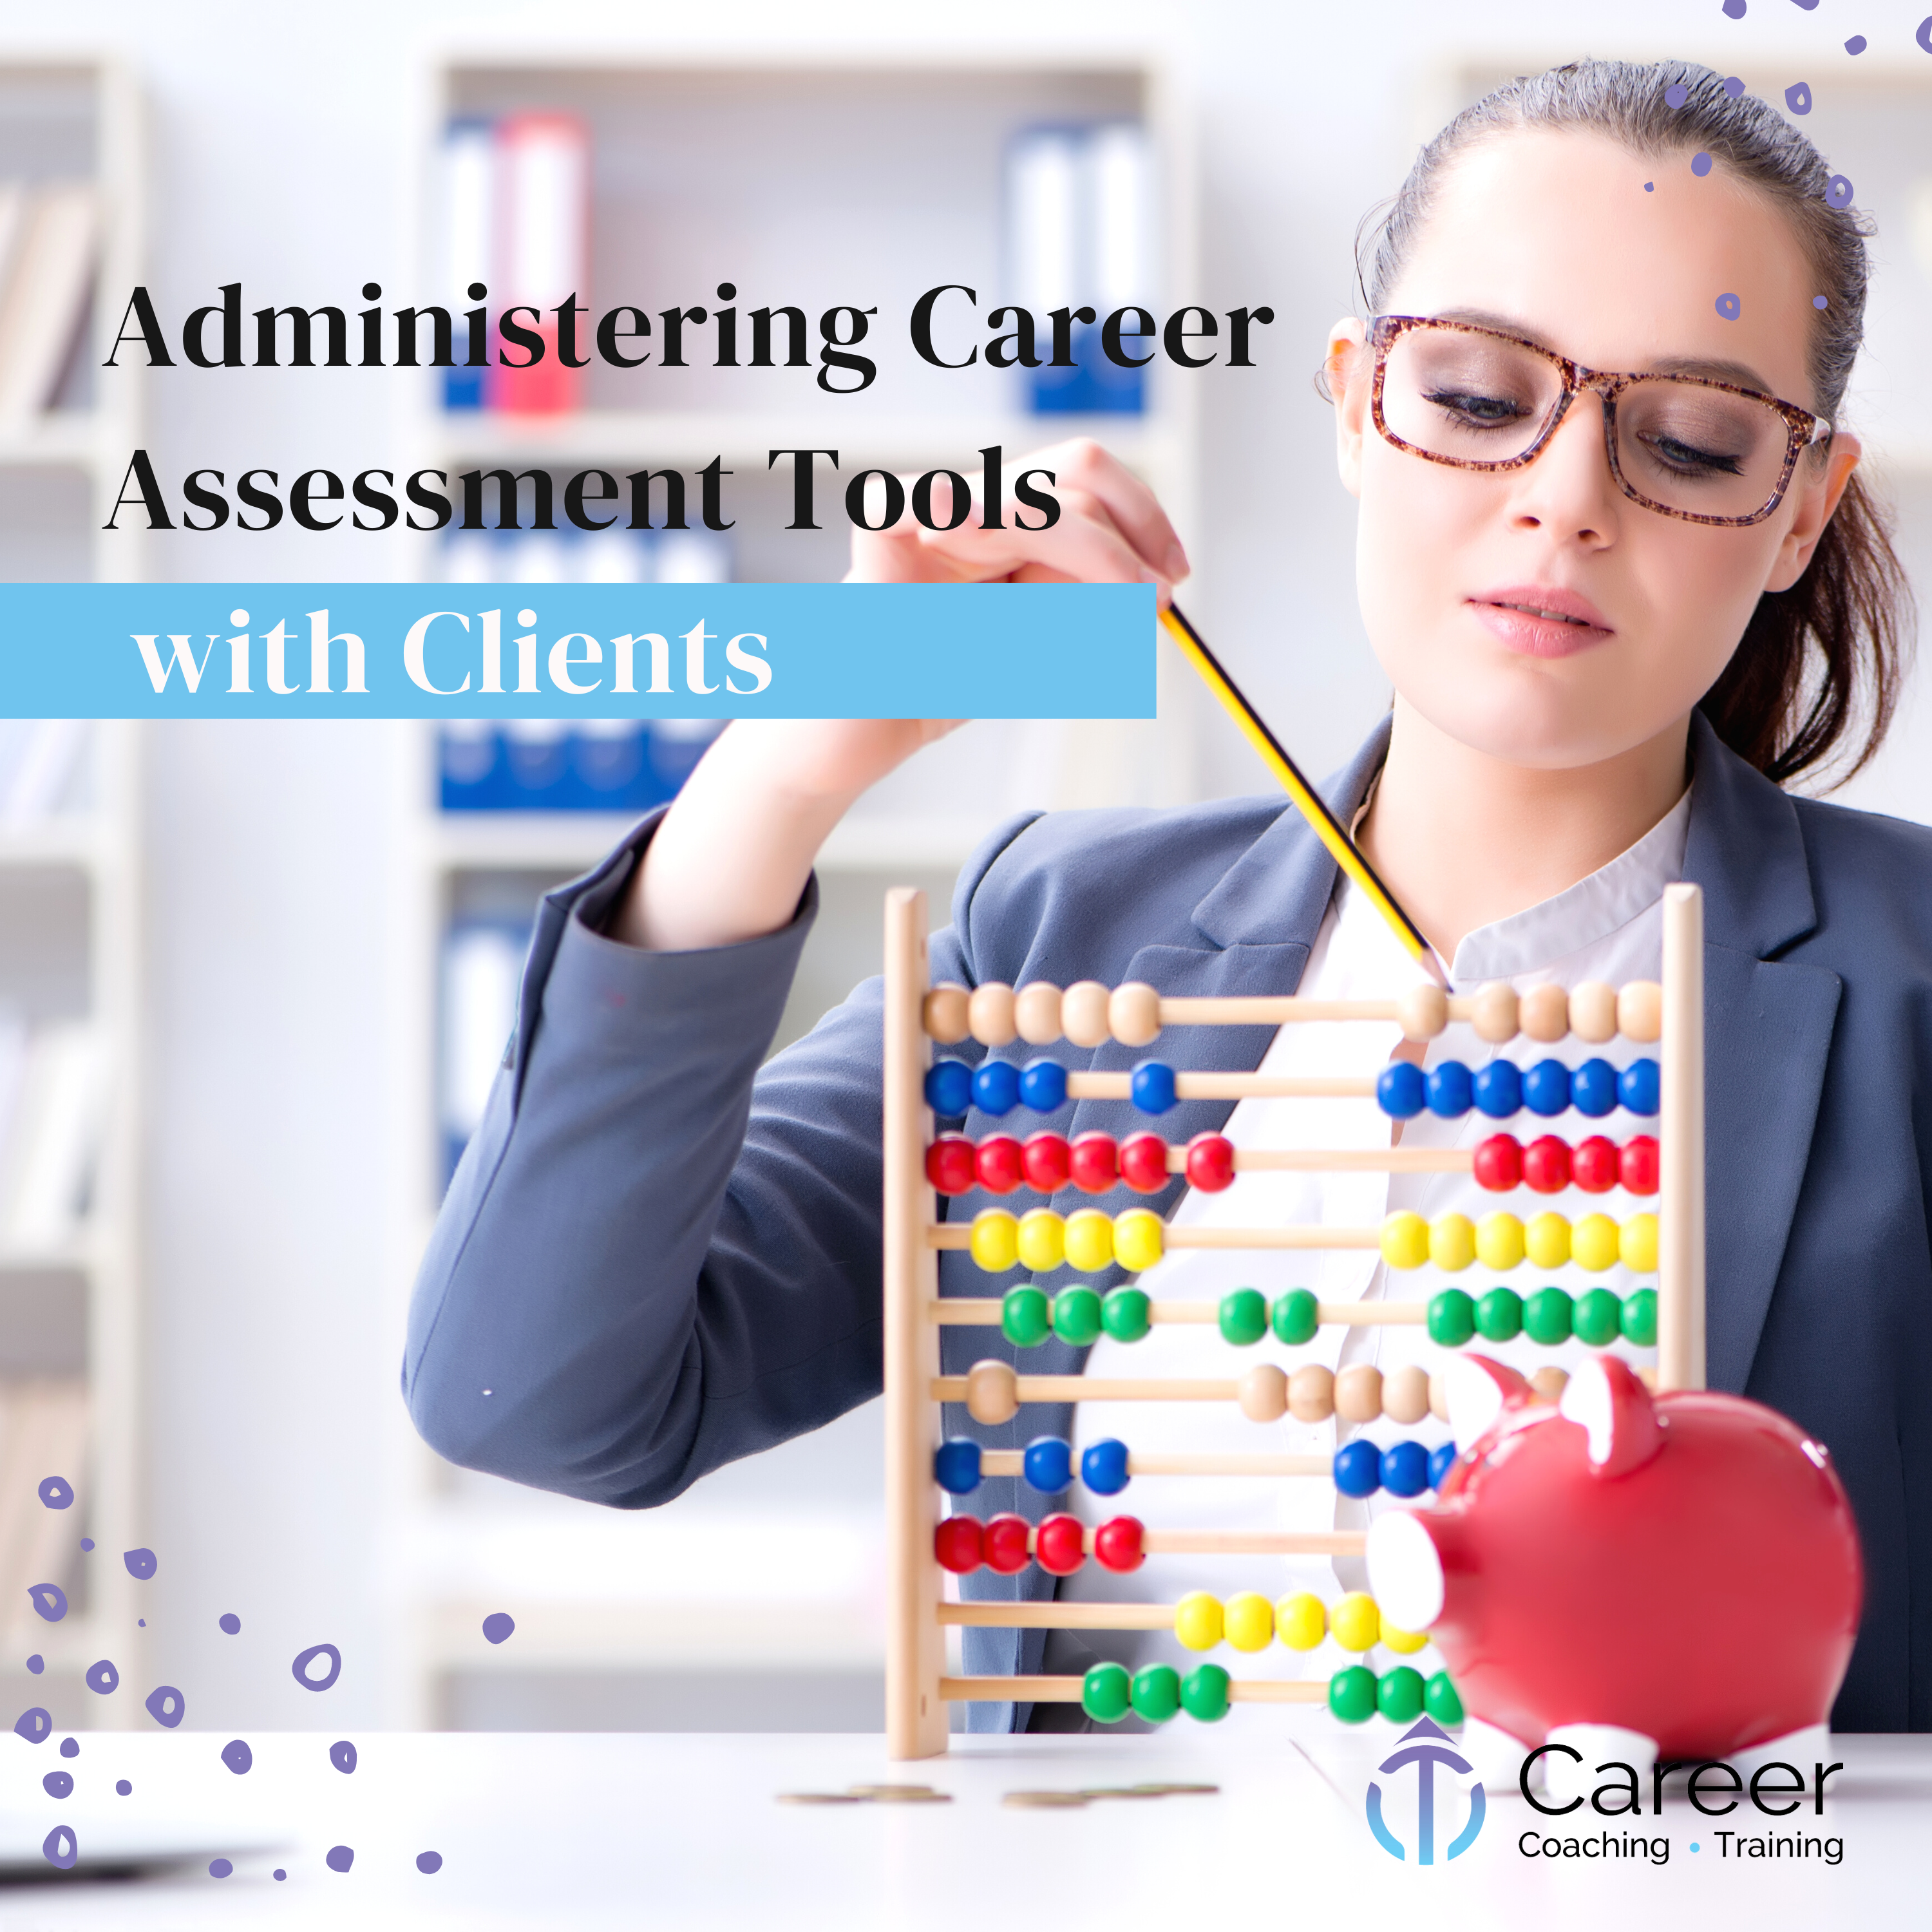 Administering Career Assessment Tools with Clients